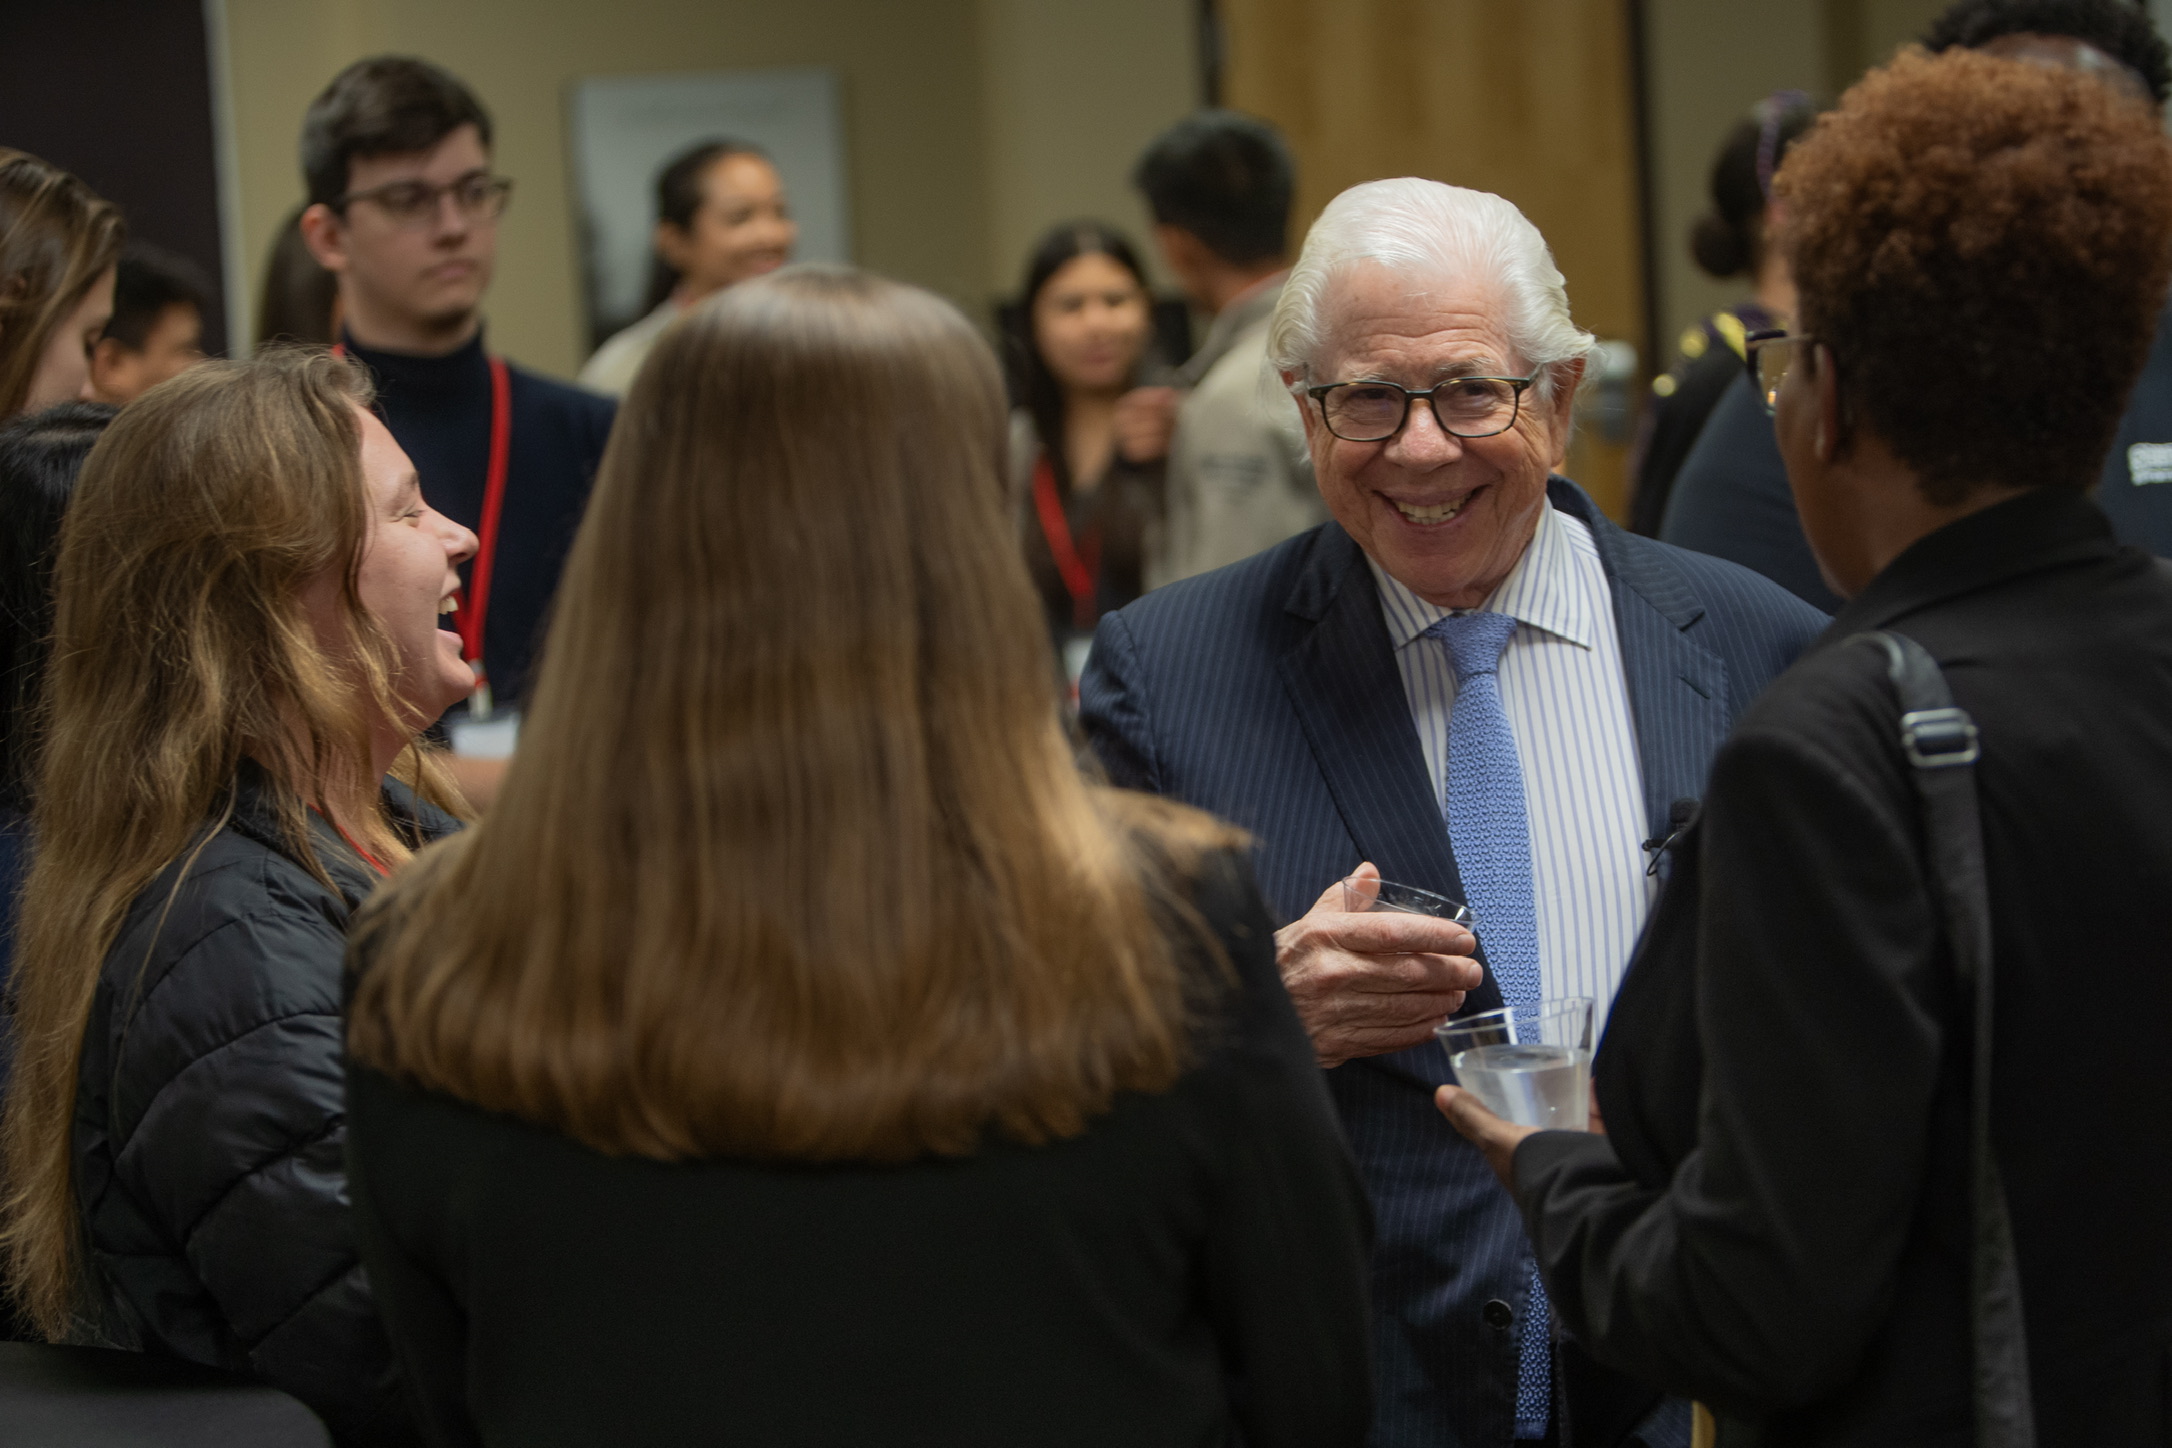 Carl Bernstein meets with students and guests before the main event